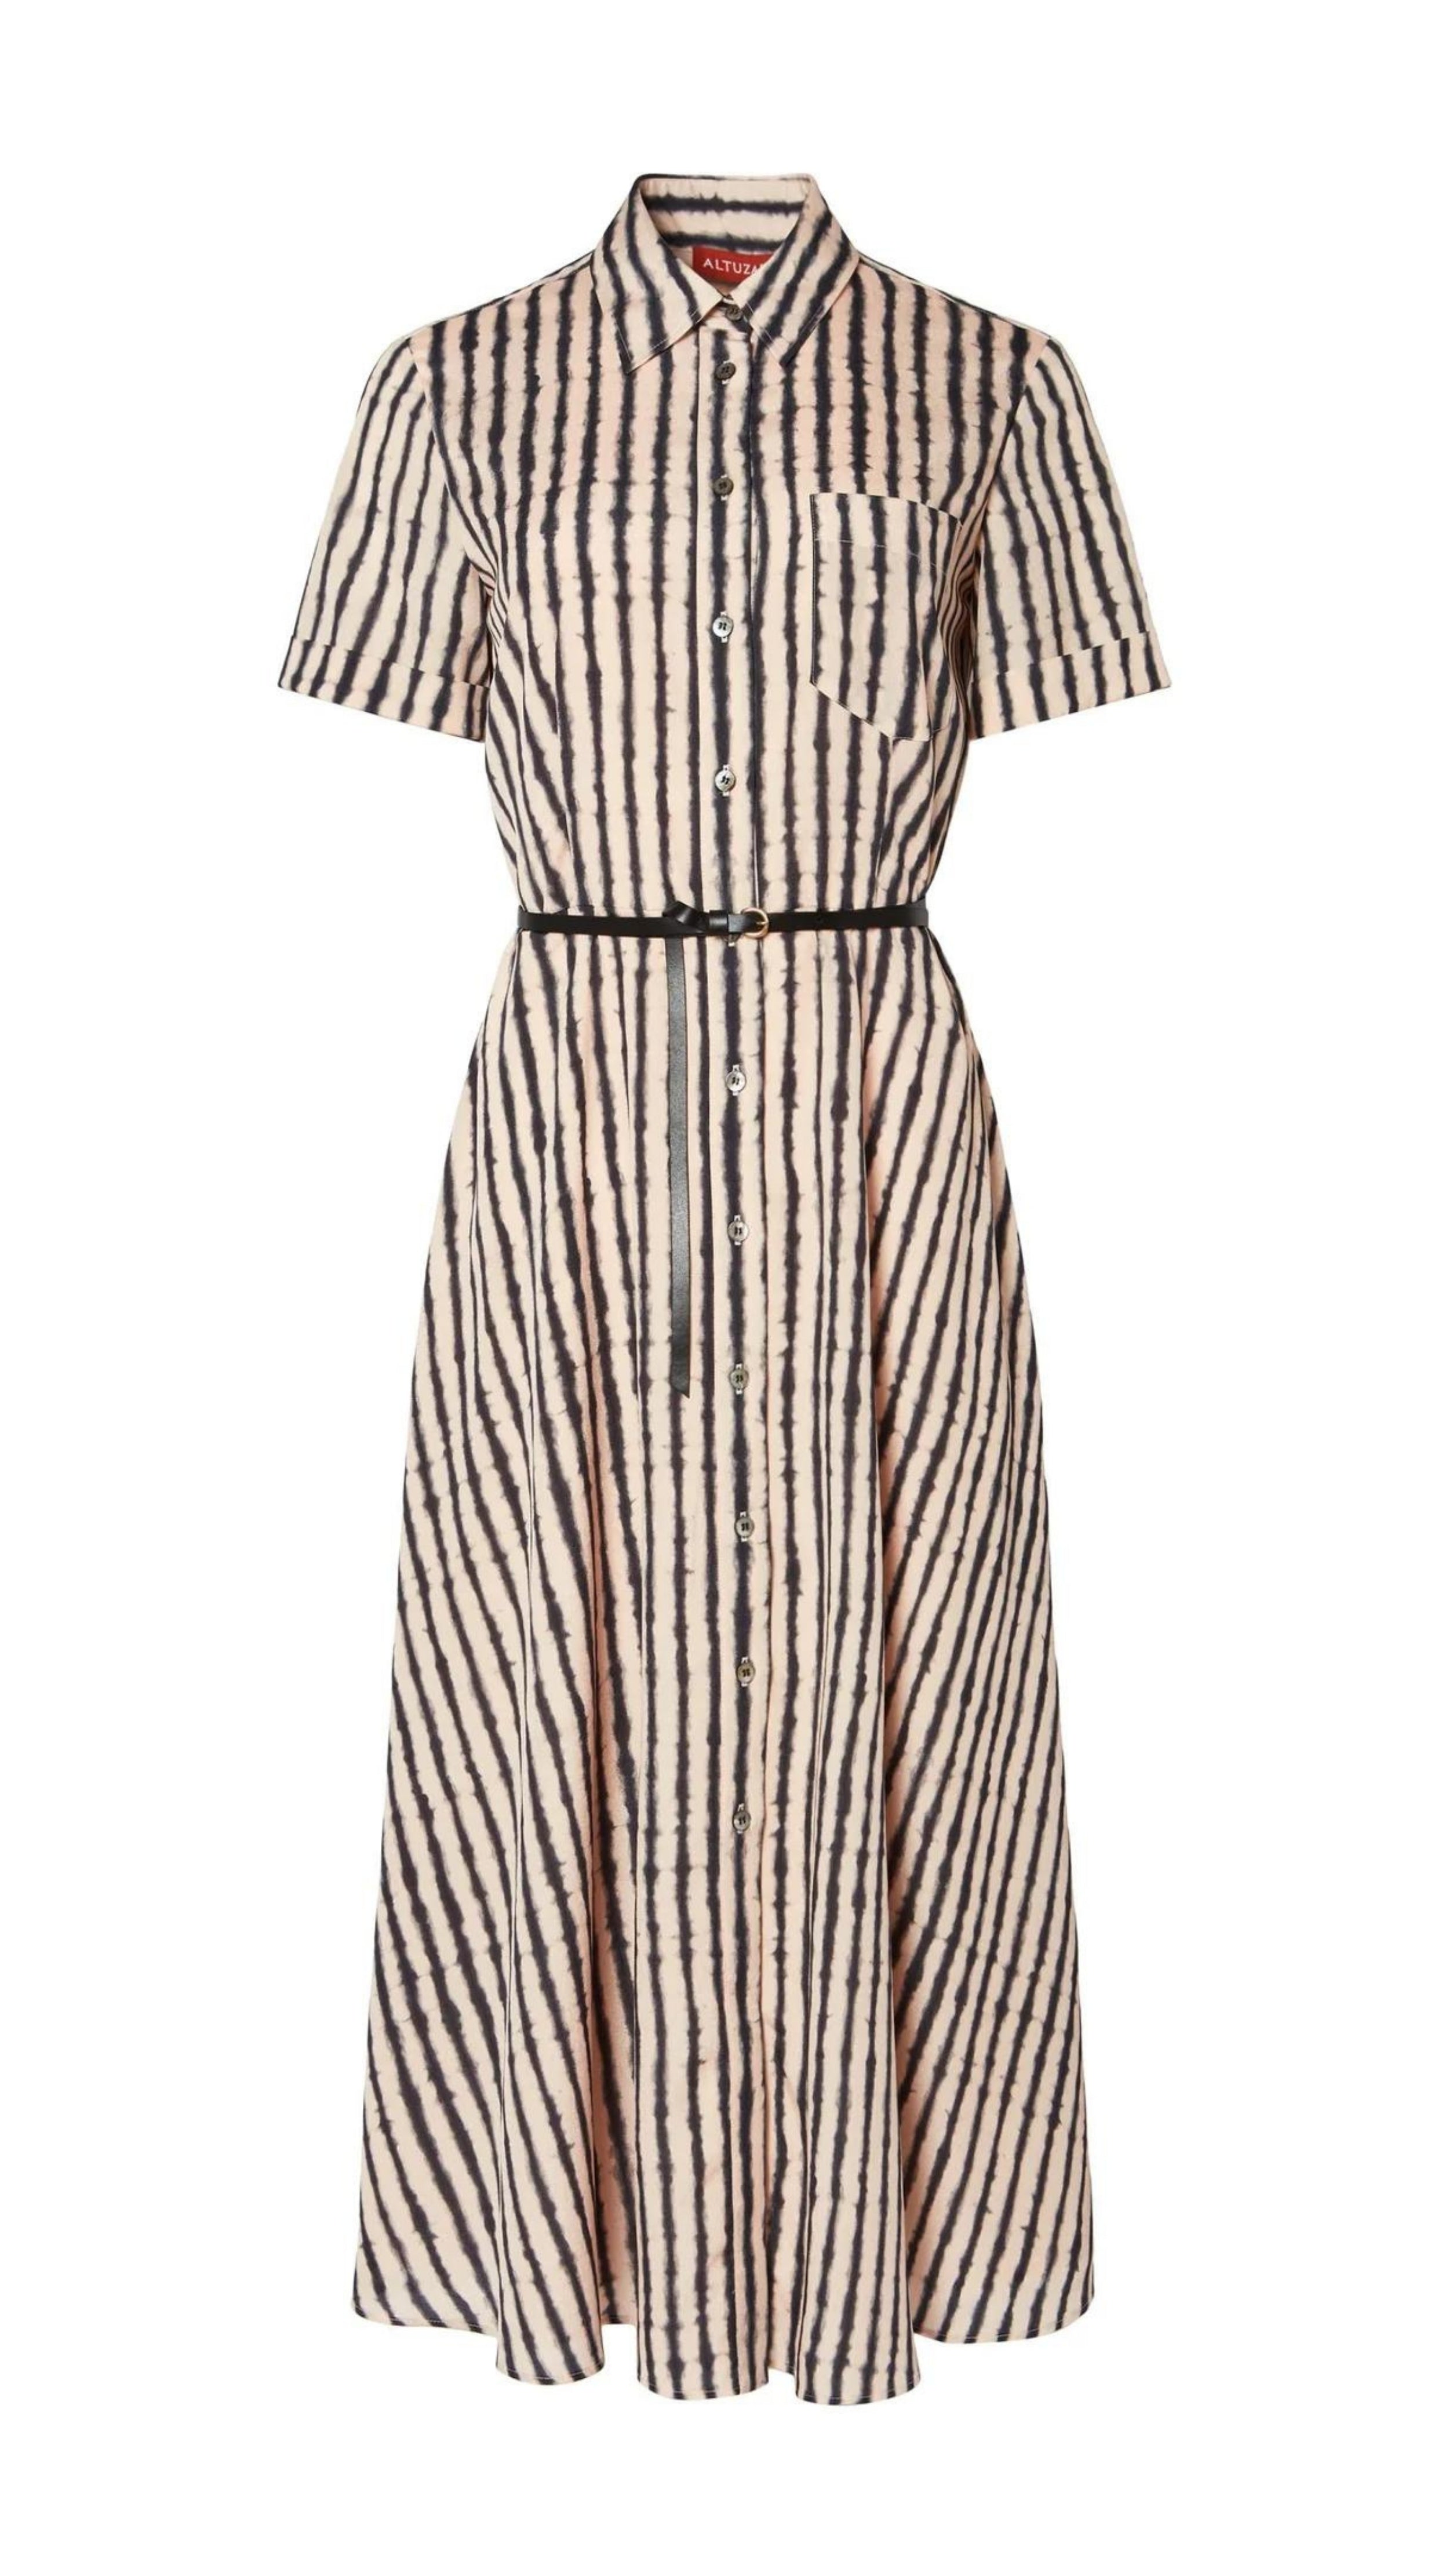 Altuzarra Kiera Dress The &#39;Kiera&#39; dress is designed with a small point collar, short sleeves and a flattering A-line skirt. It is detailed with a slim leather waist belt and features a black and white stripe pattern and a front breast pocket. Product photo facing front.